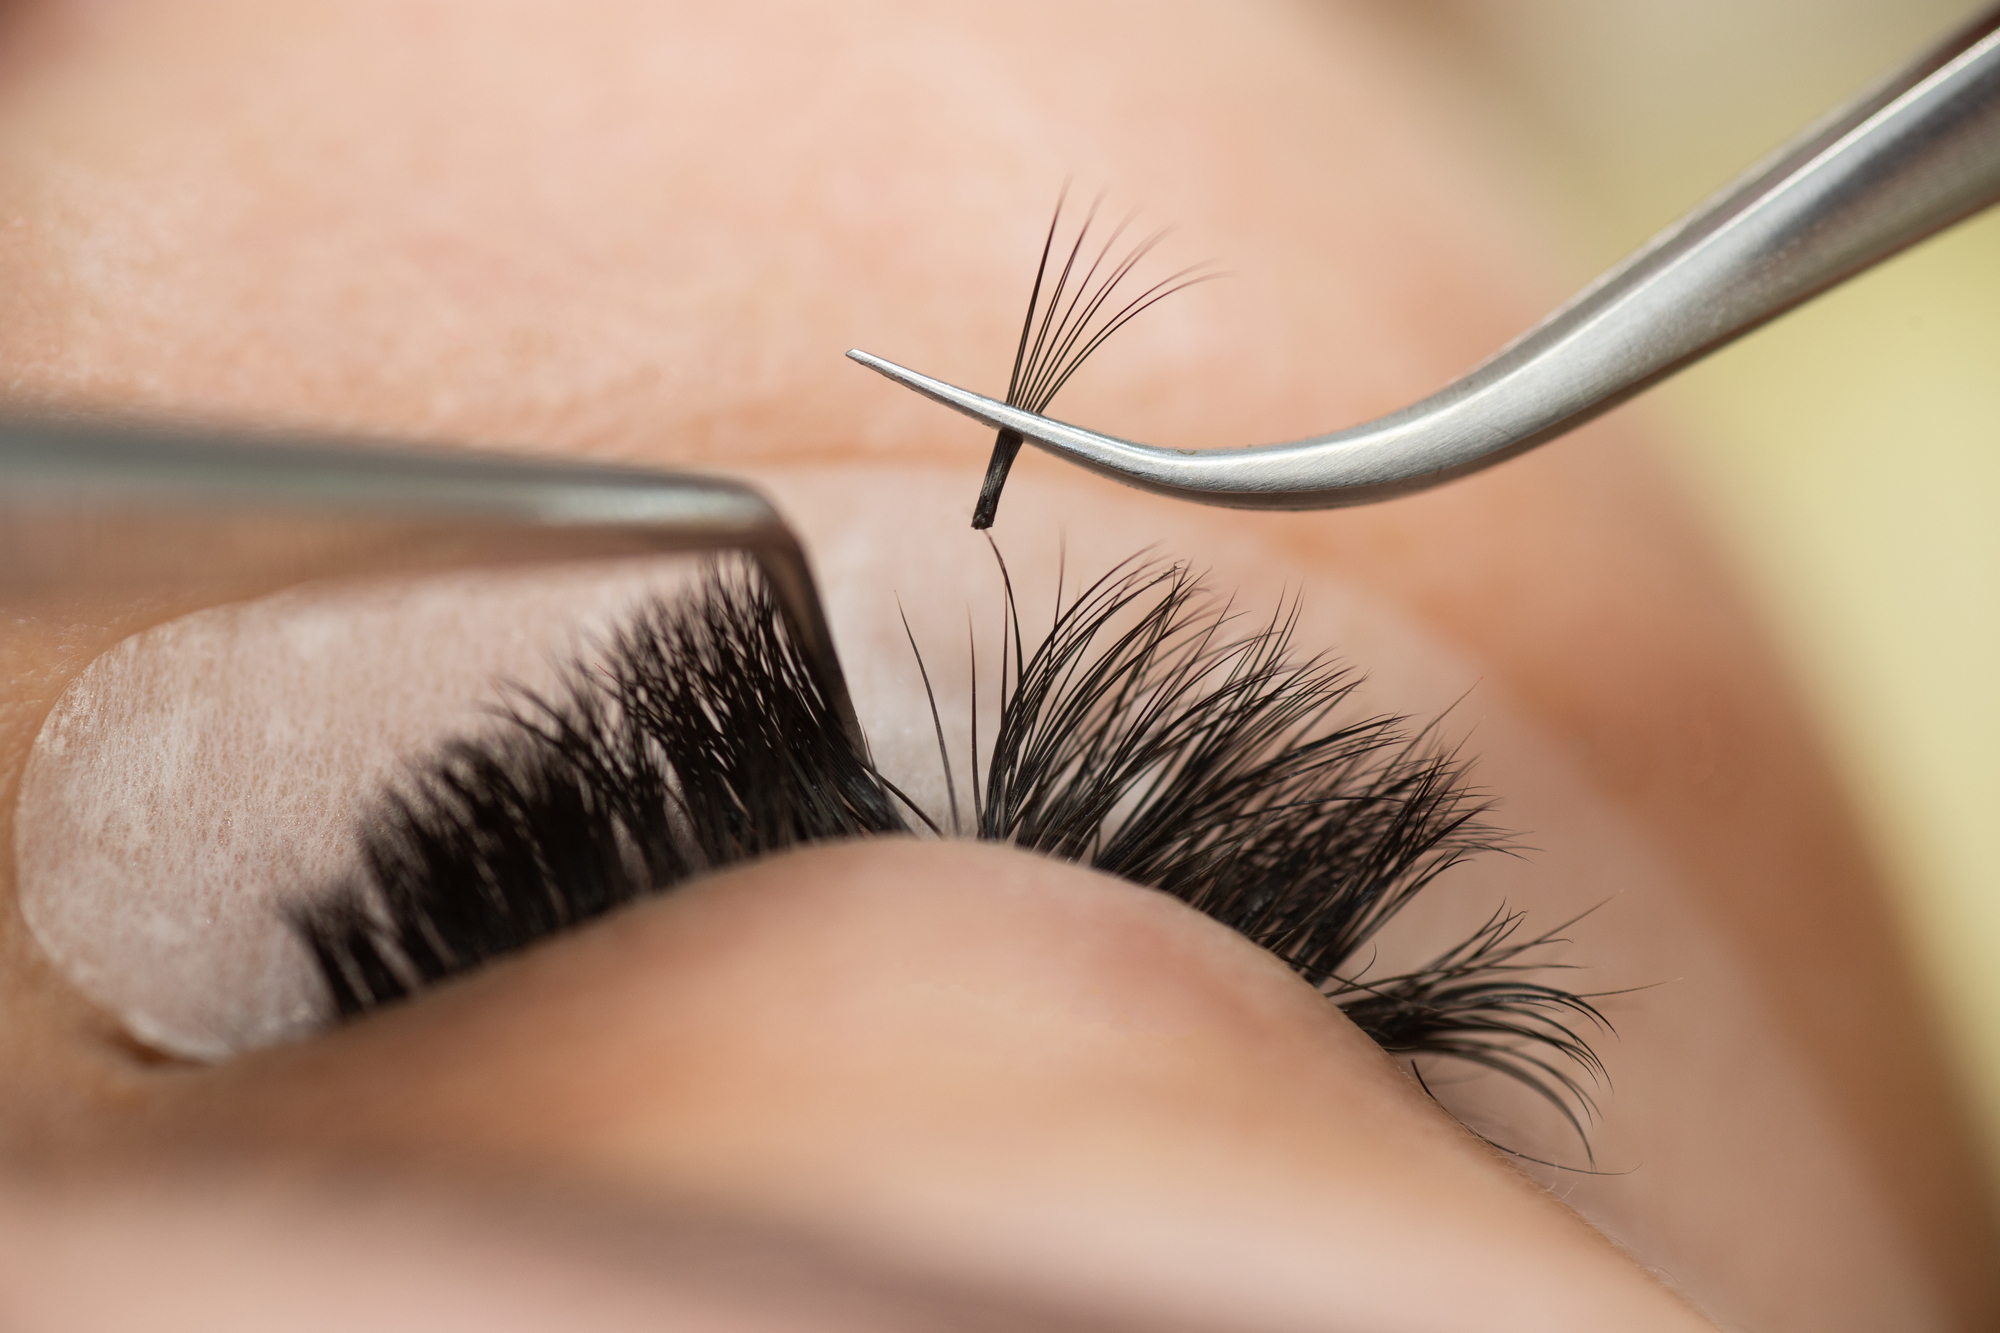 signs of damage to your natural lashes from extensions